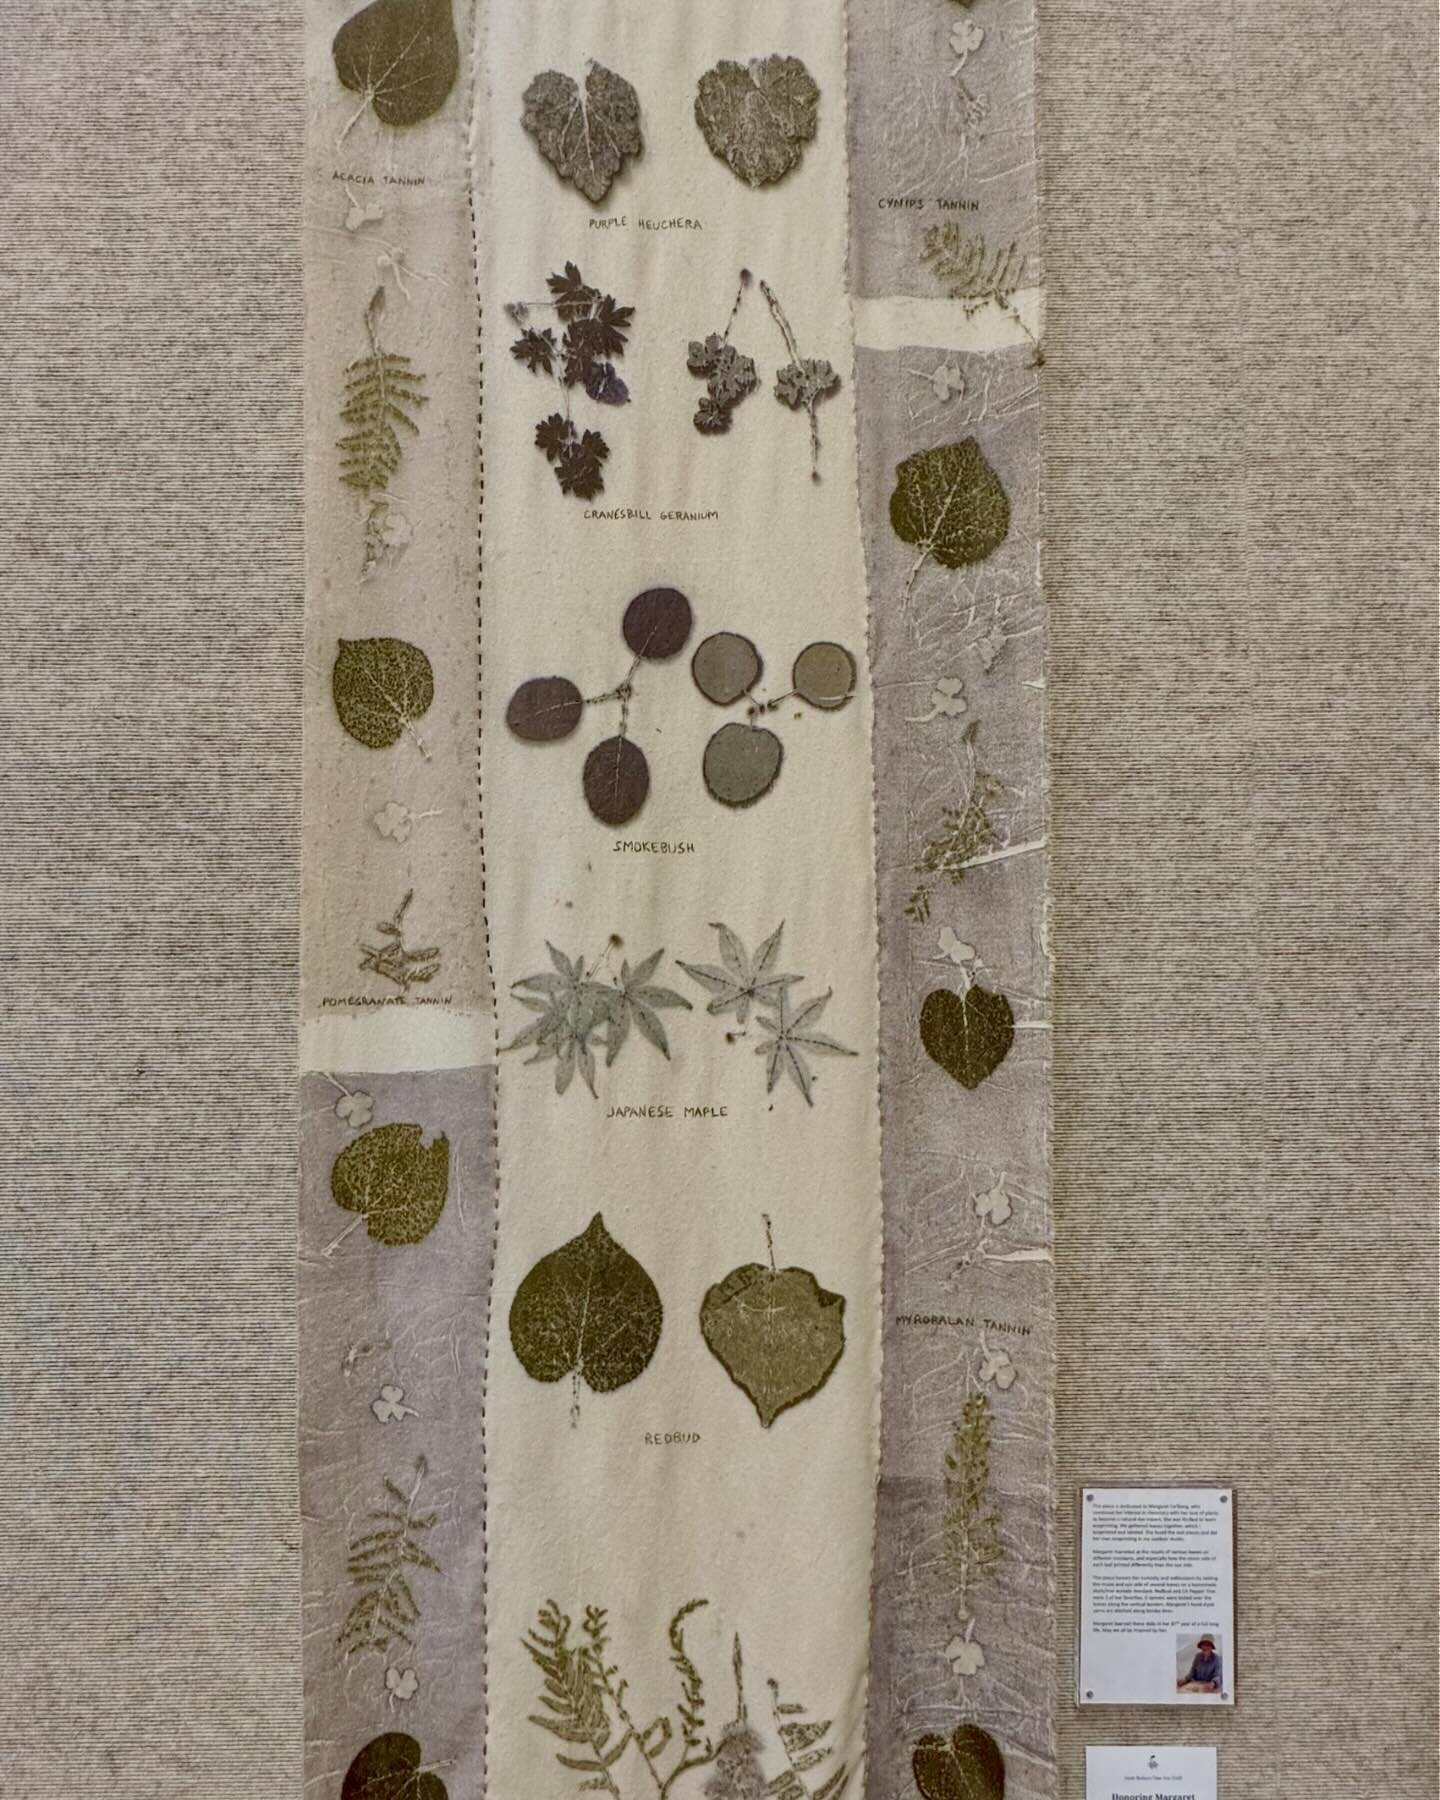 The @sbfiberartsguild show at @santa_barbara_library &lsquo;s Faulkner Gallery is now over; here is the piece I entered. It&rsquo;s a dedication to Margaret Carlberg , and a celebration of the joy we shared because of our mutual passions for natural 